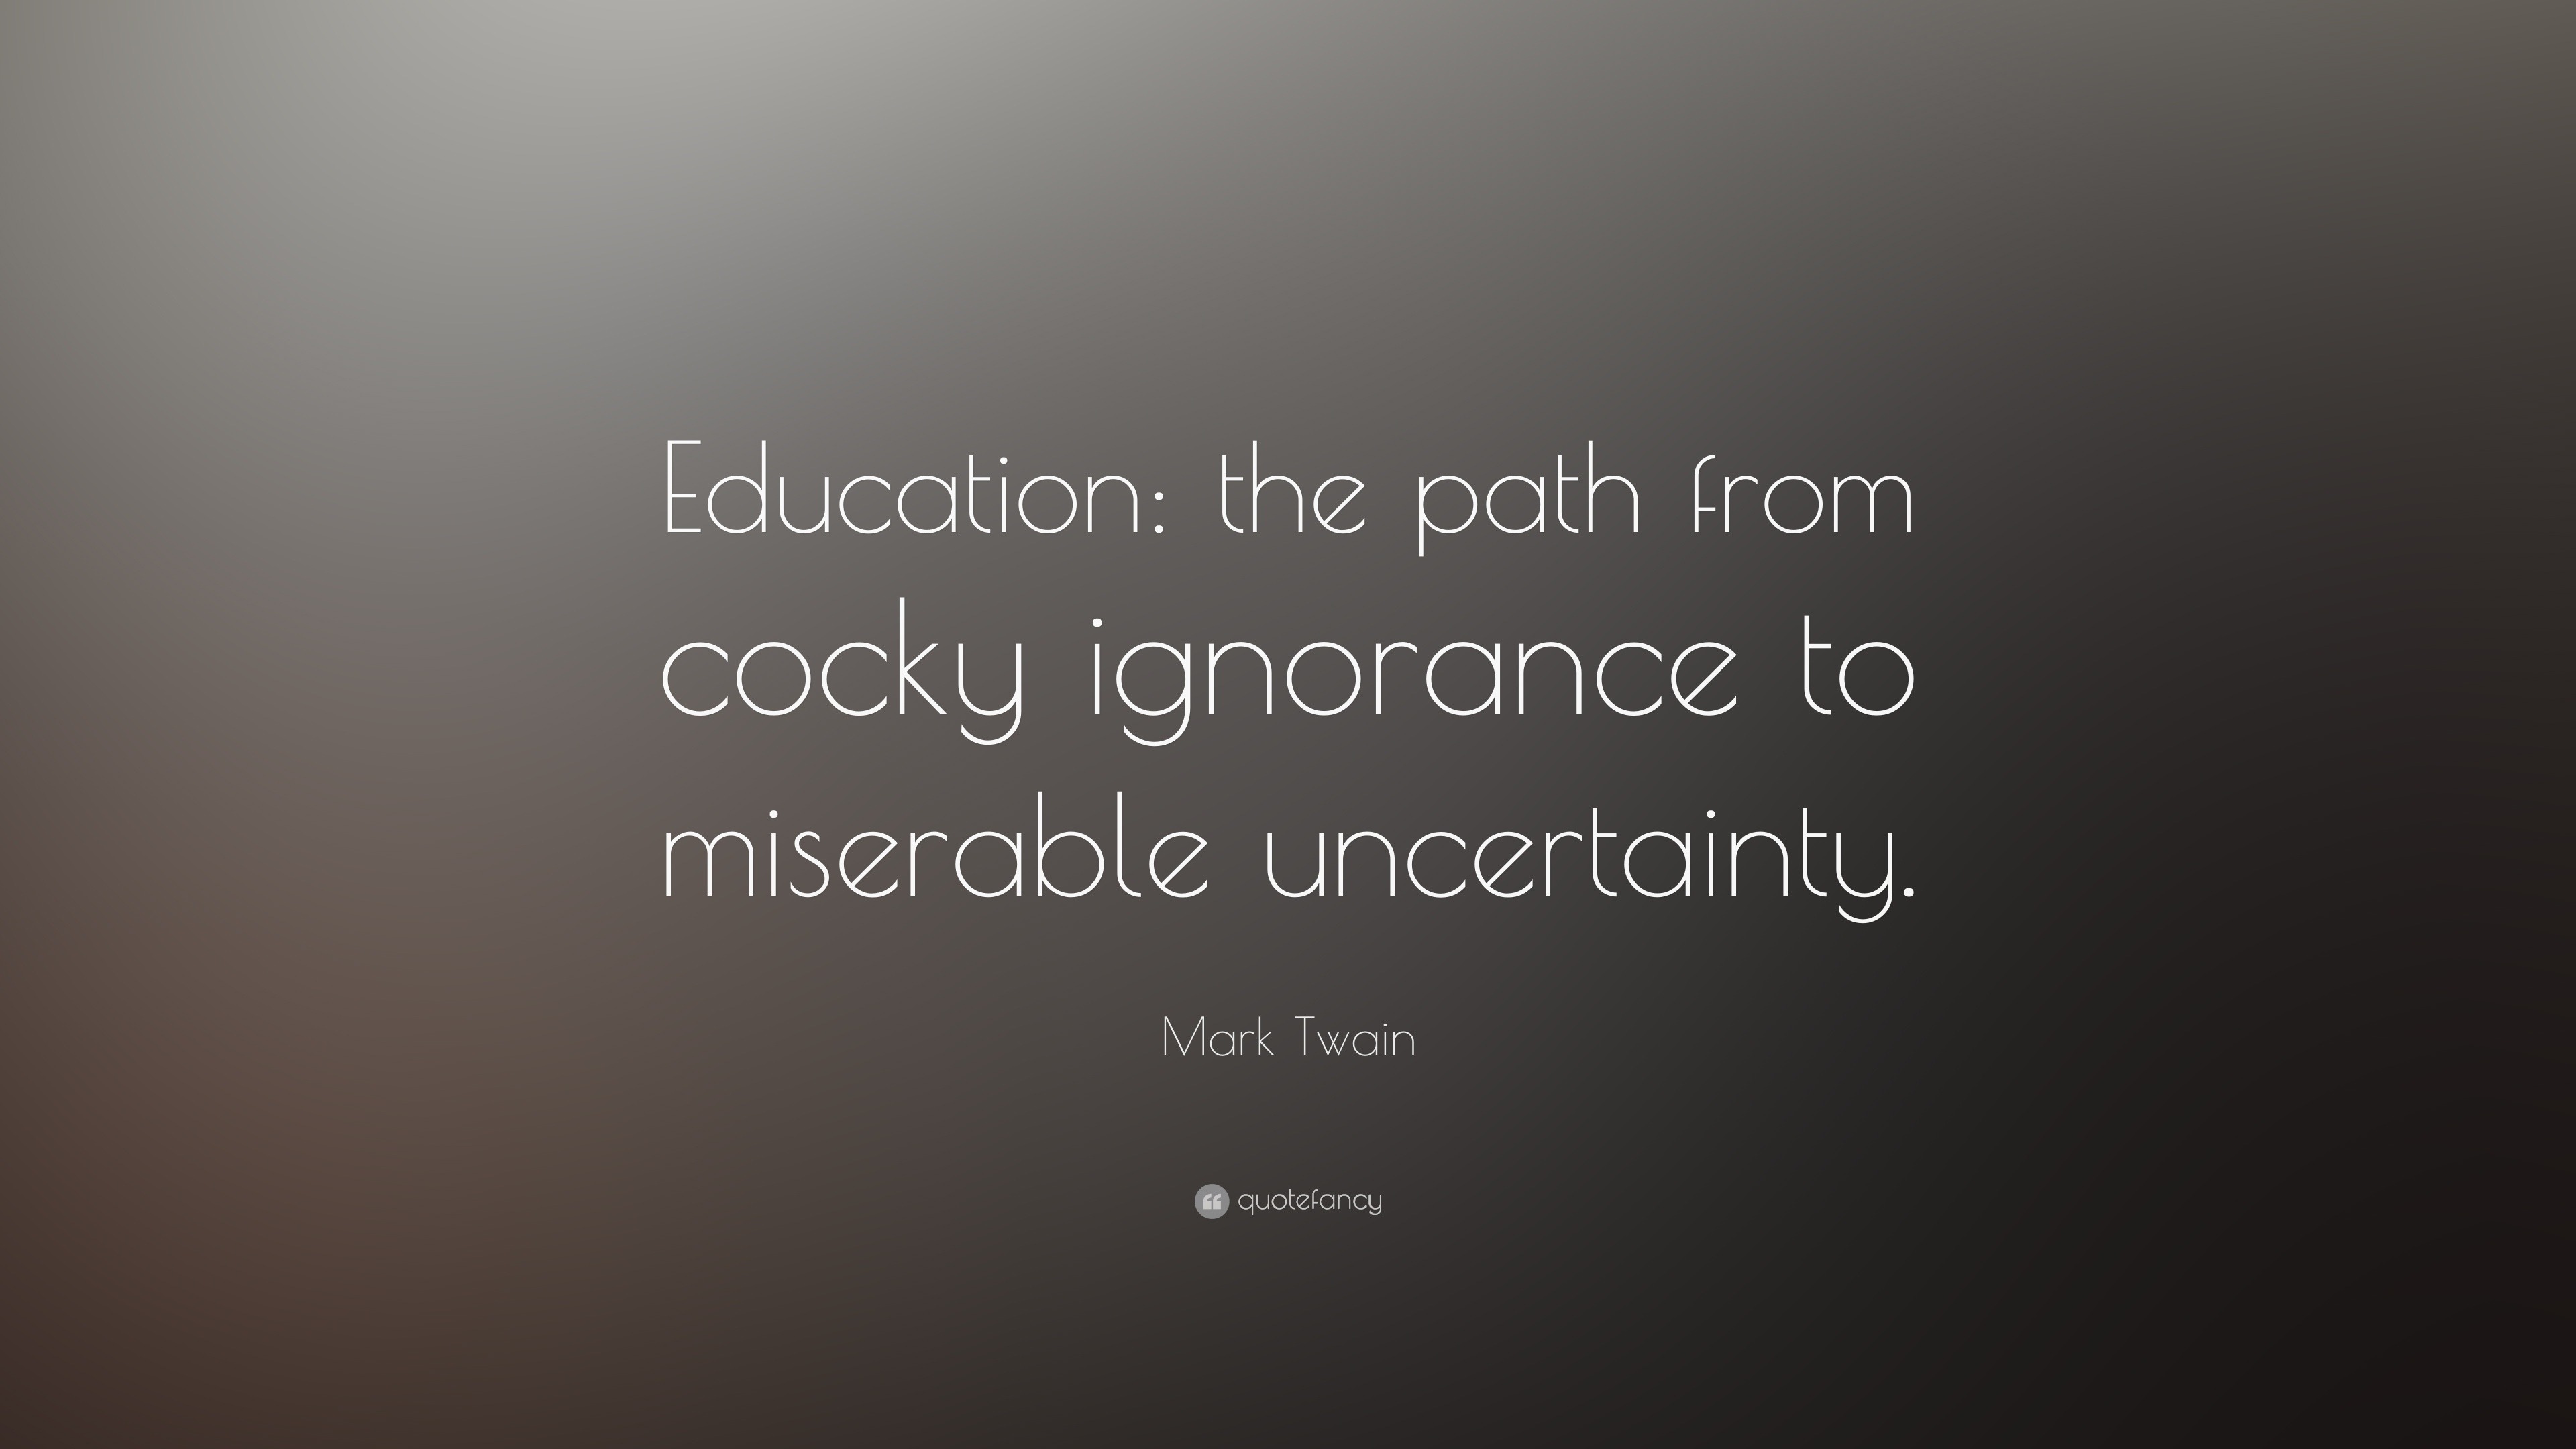 Mark Twain Quote “Education the path from cocky ignorance to miserable uncertainty